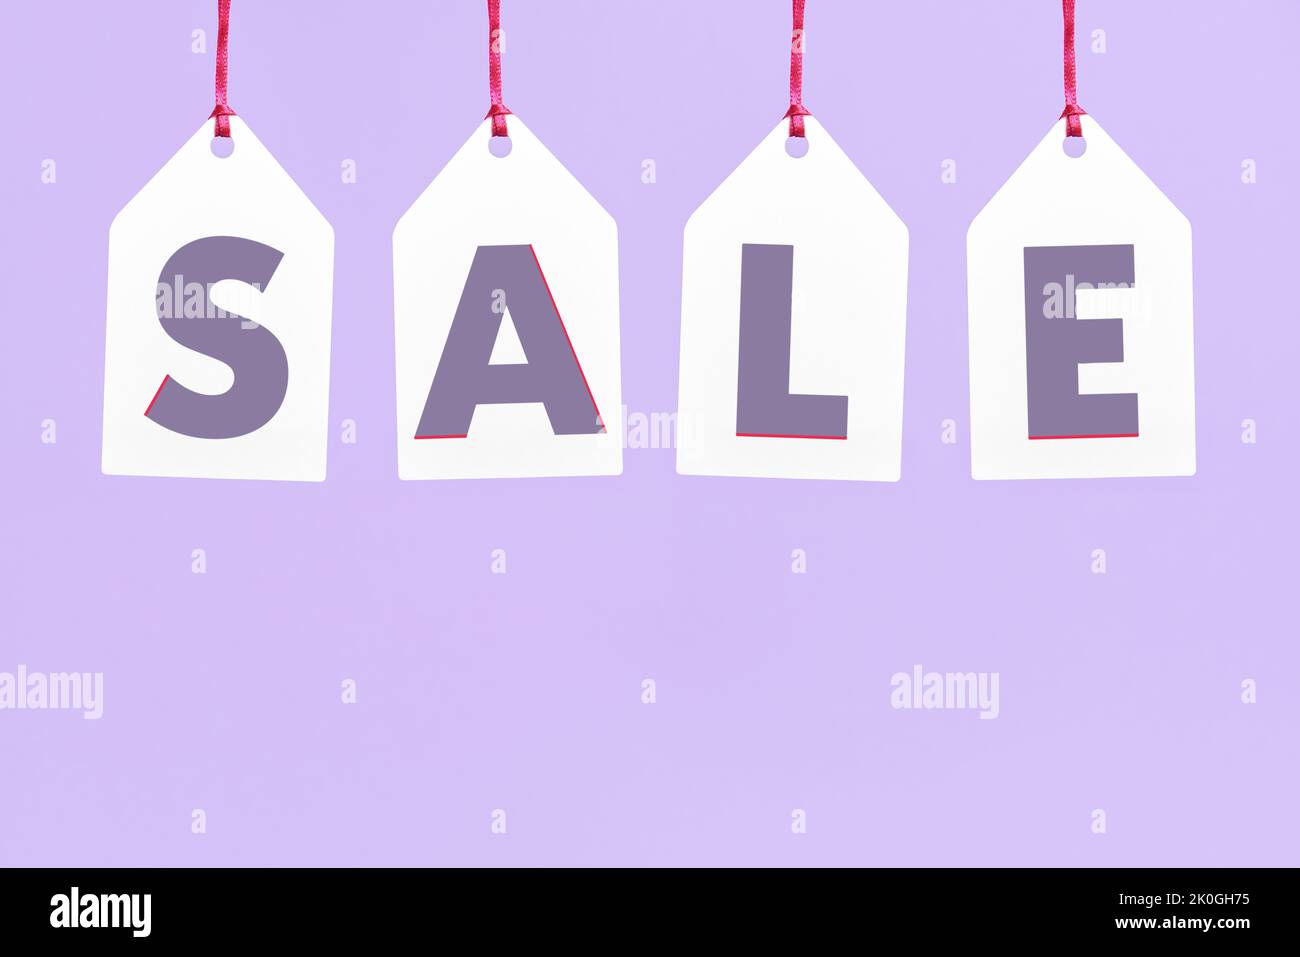 Word Sale written on white paper labels hanging on a pastel lilac background. Simple design with copy space. Concepts: seasonal sales and discounts, b Stock Photo